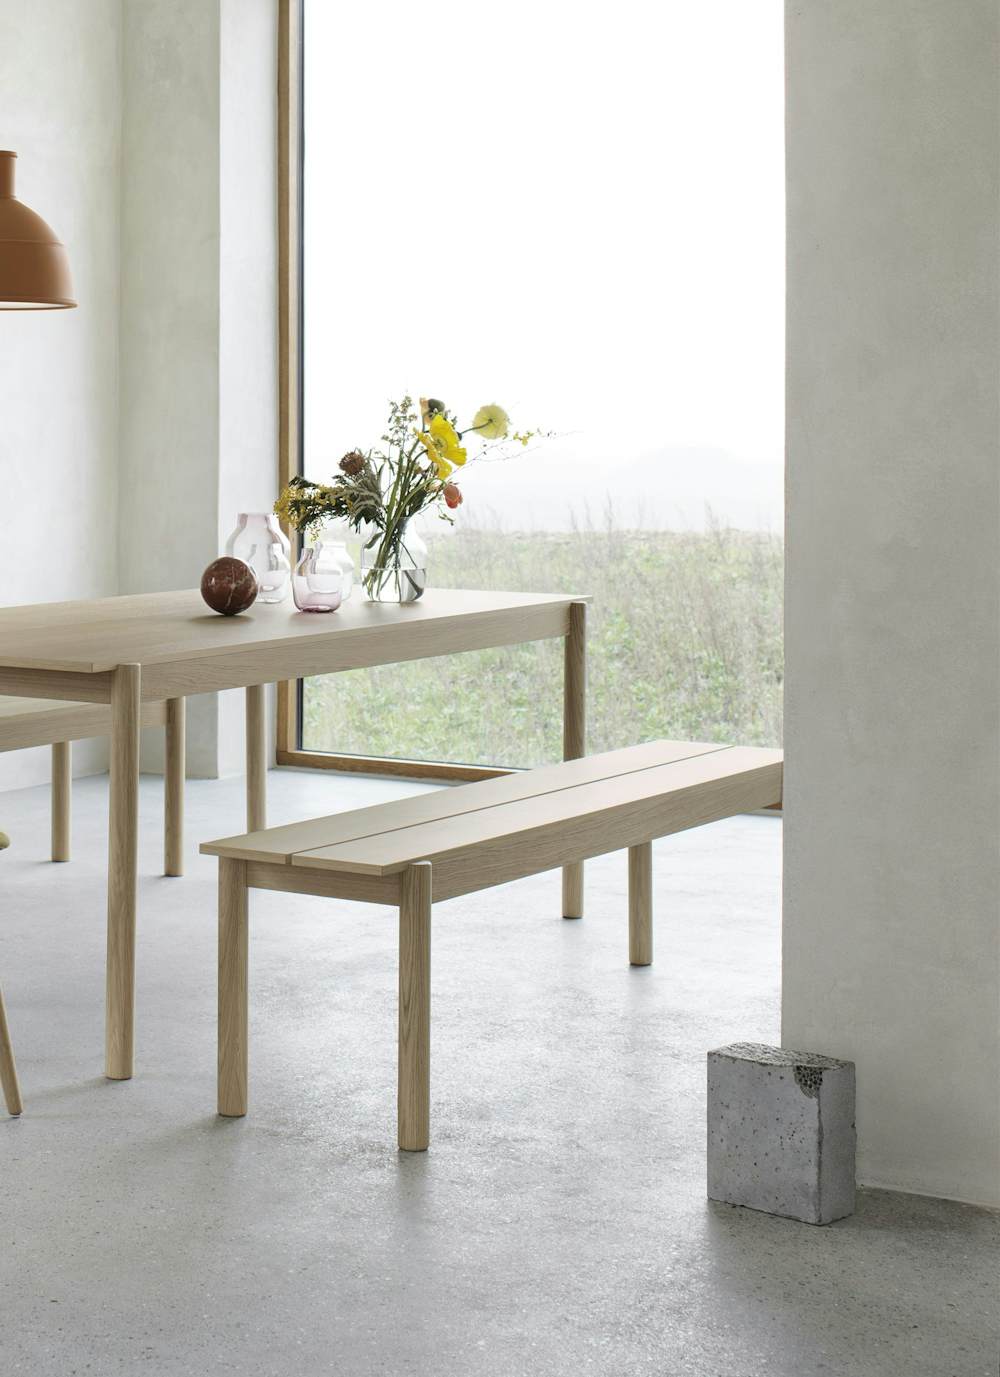 Linear Benches and Linear Table in a dining room setting